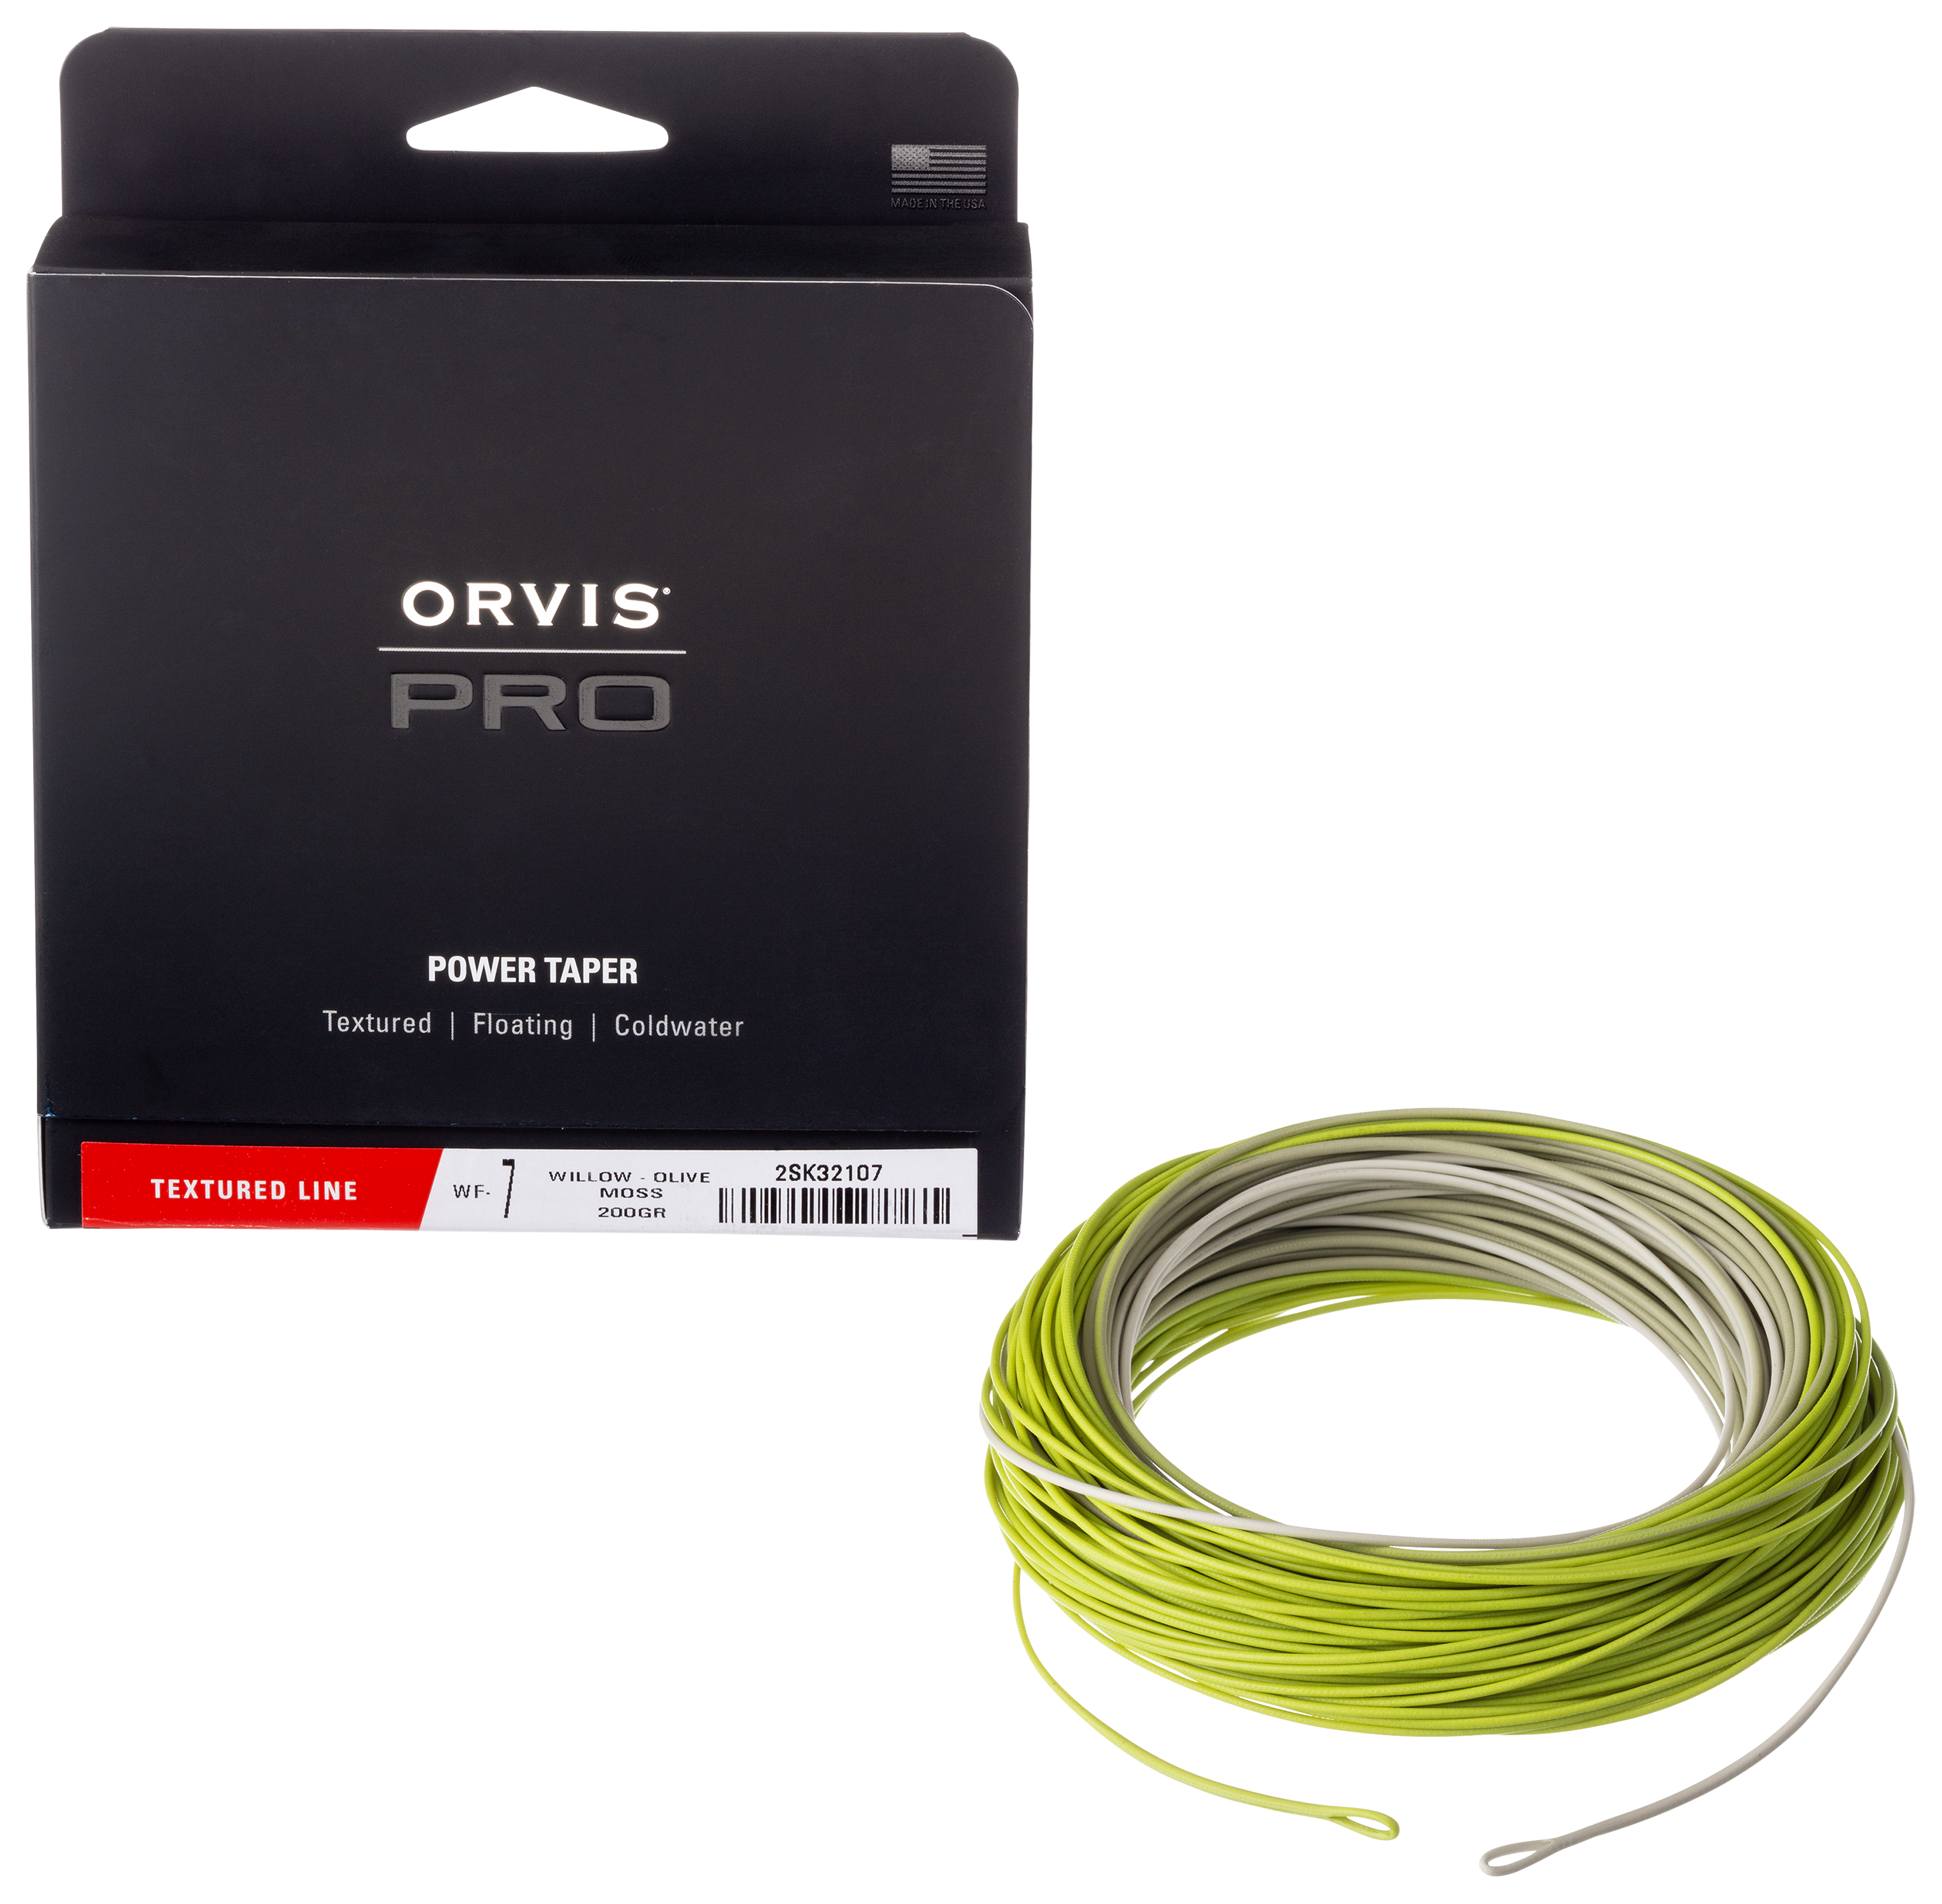 Orvis Pro Power Taper Textured Fly Line - Line Weight 6